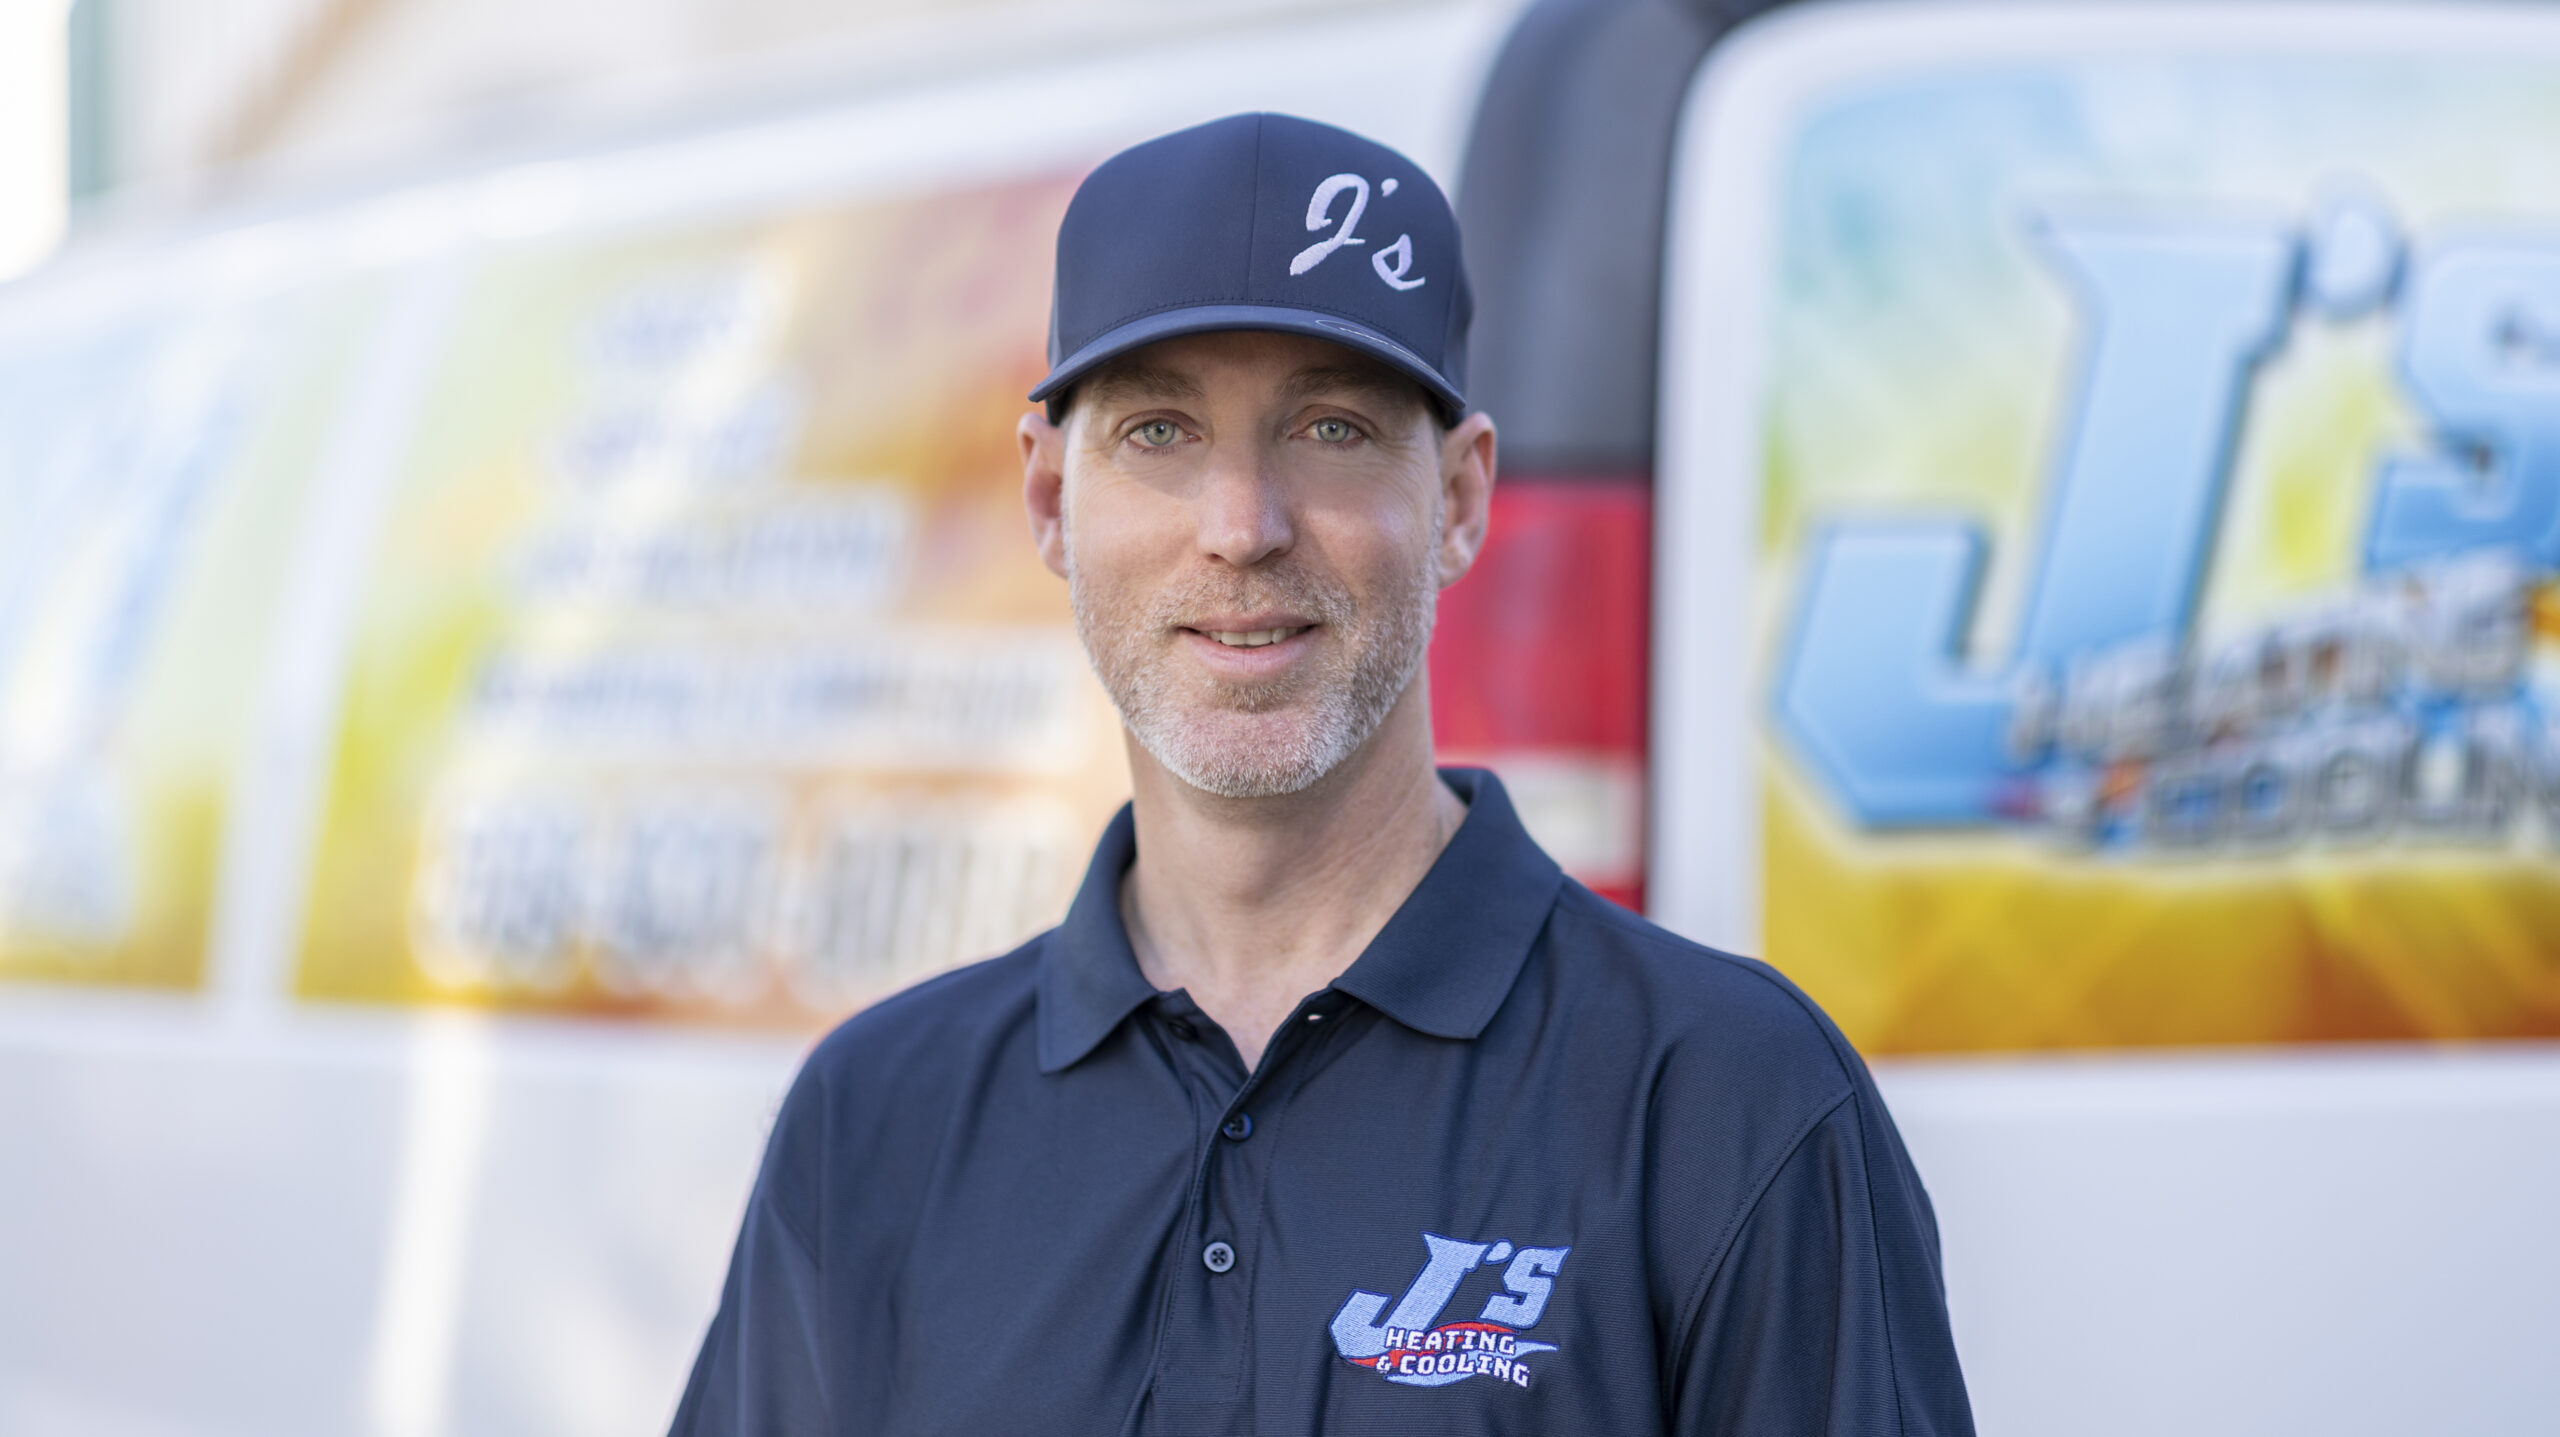 J's Heating and Cooling Johnny Hawkins Van profile picture.